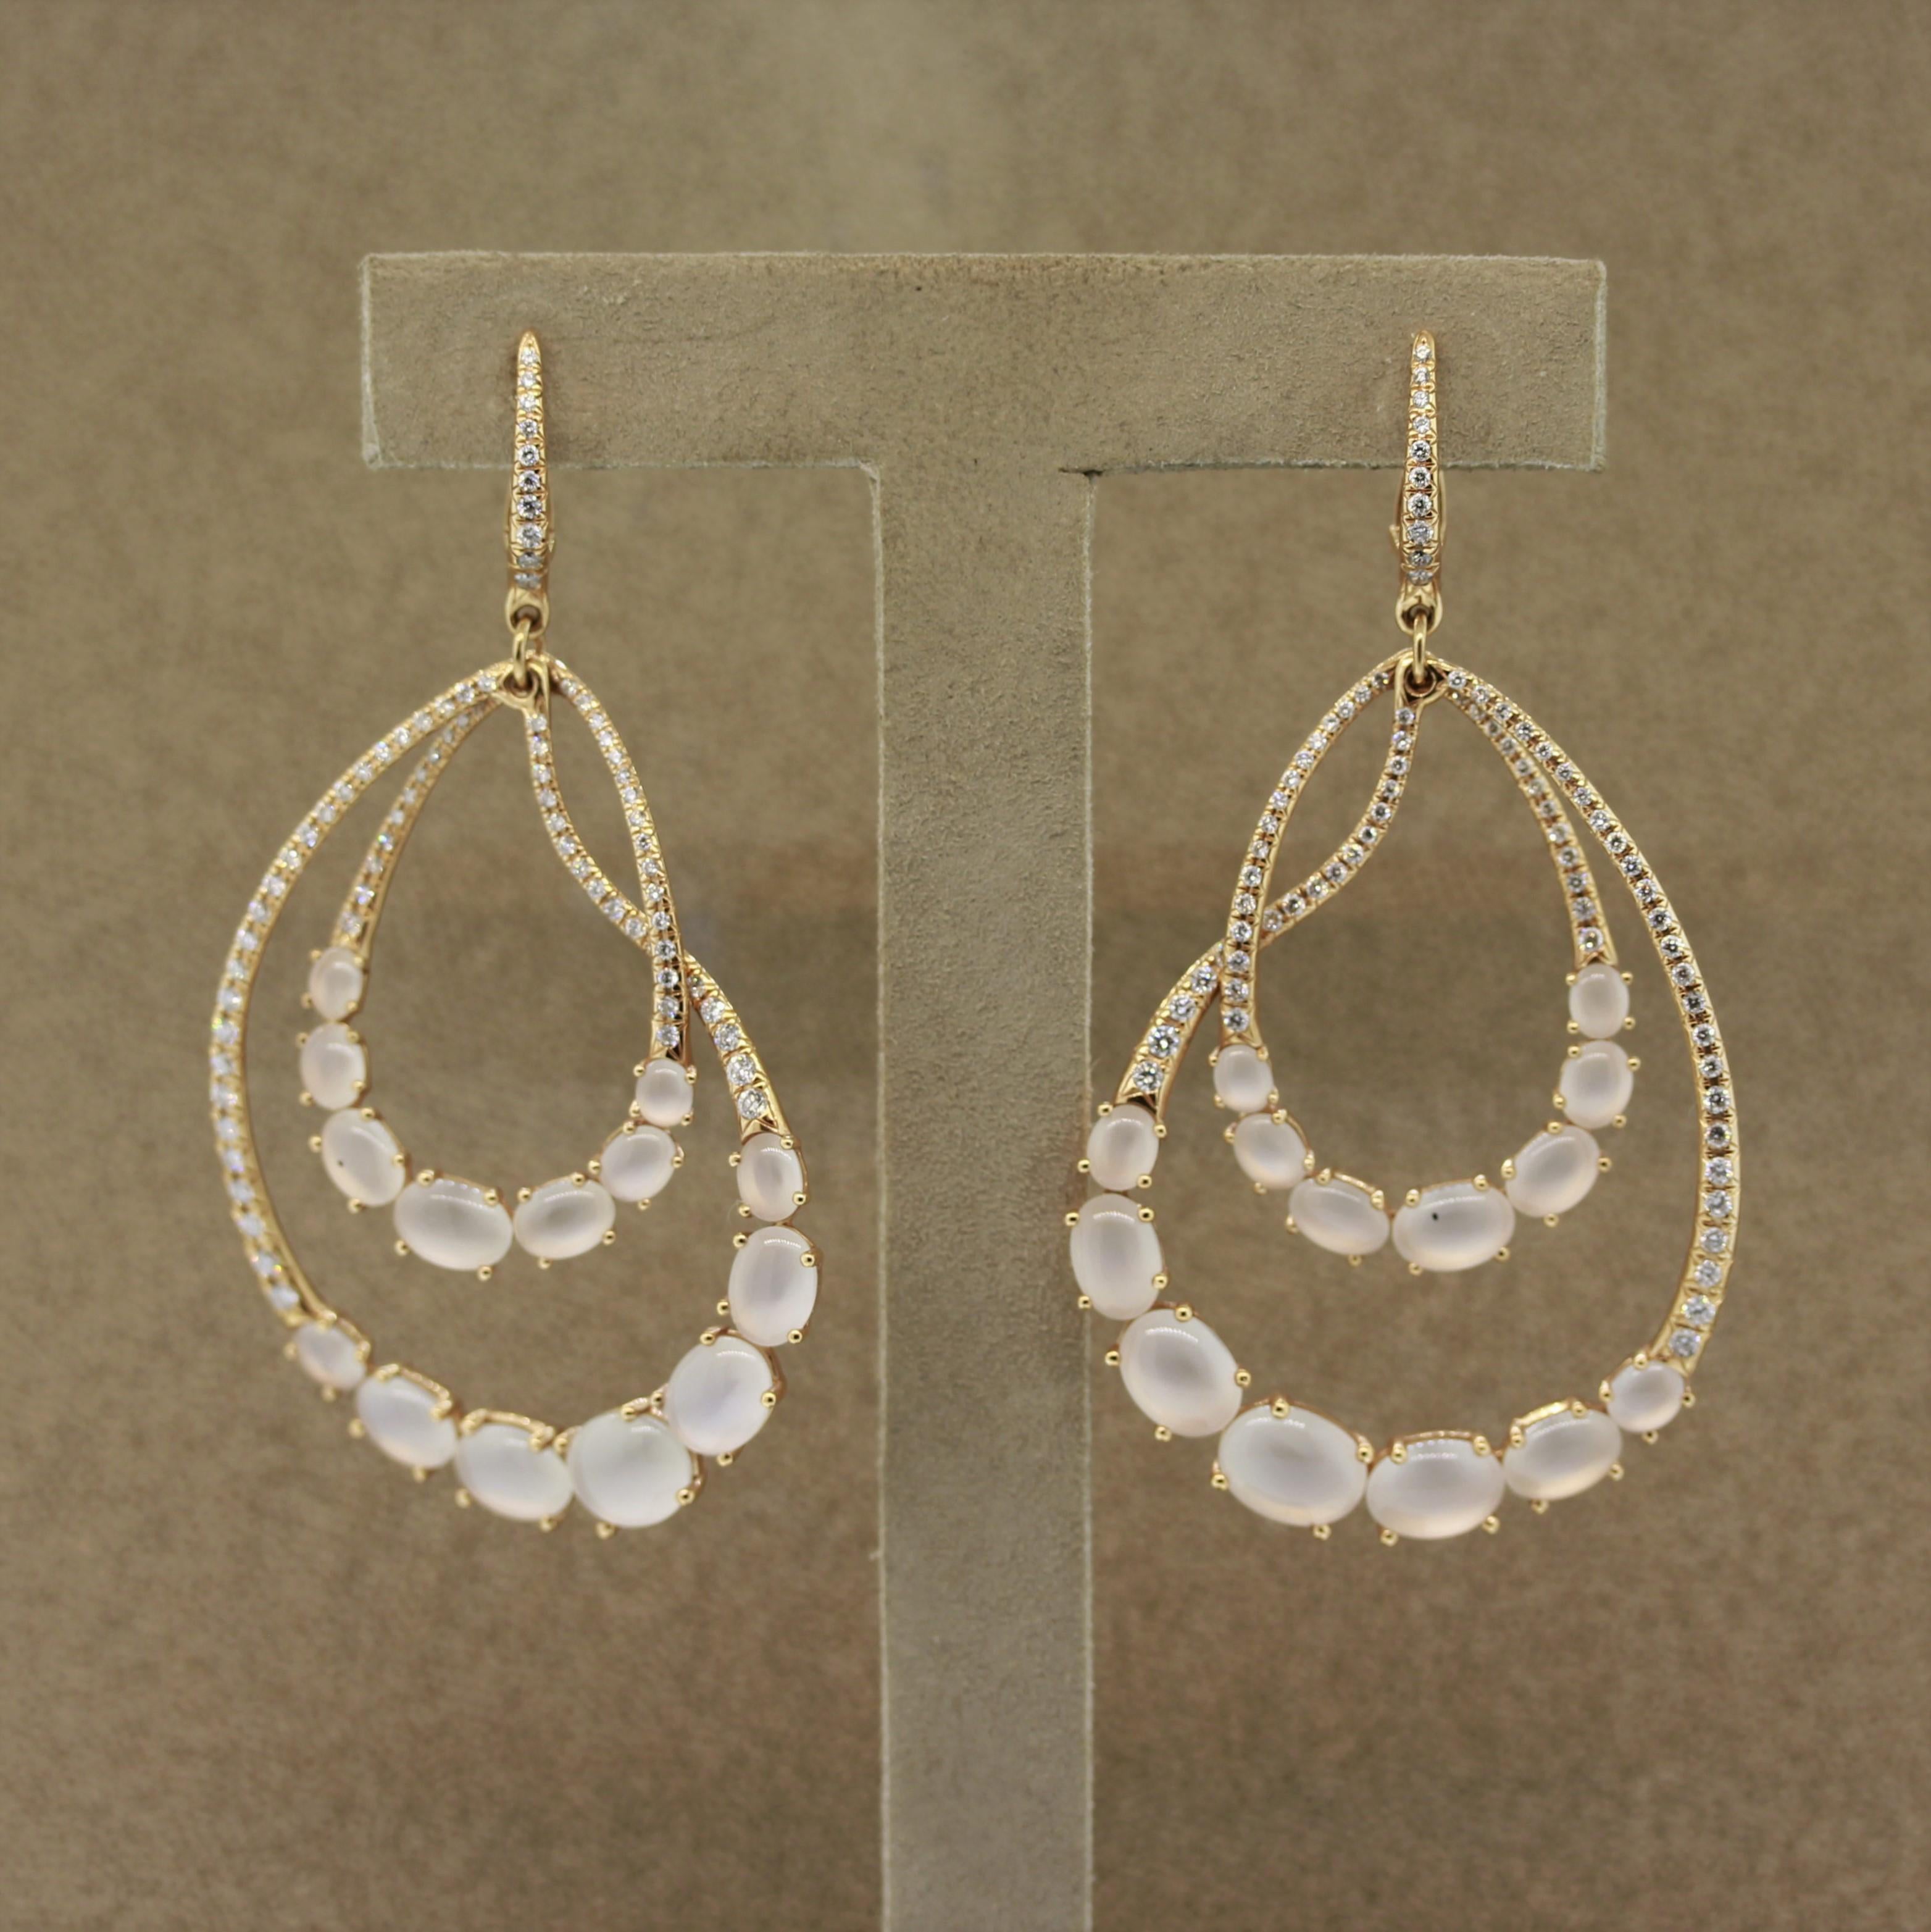 A unique pair of earrings that feature moonstones and diamonds. There are a total of 28 fine moonstones that glow as light rolls across their surface, which is called adularescence (moonstones unique phenomenon). Additionally there are 2.00 carats